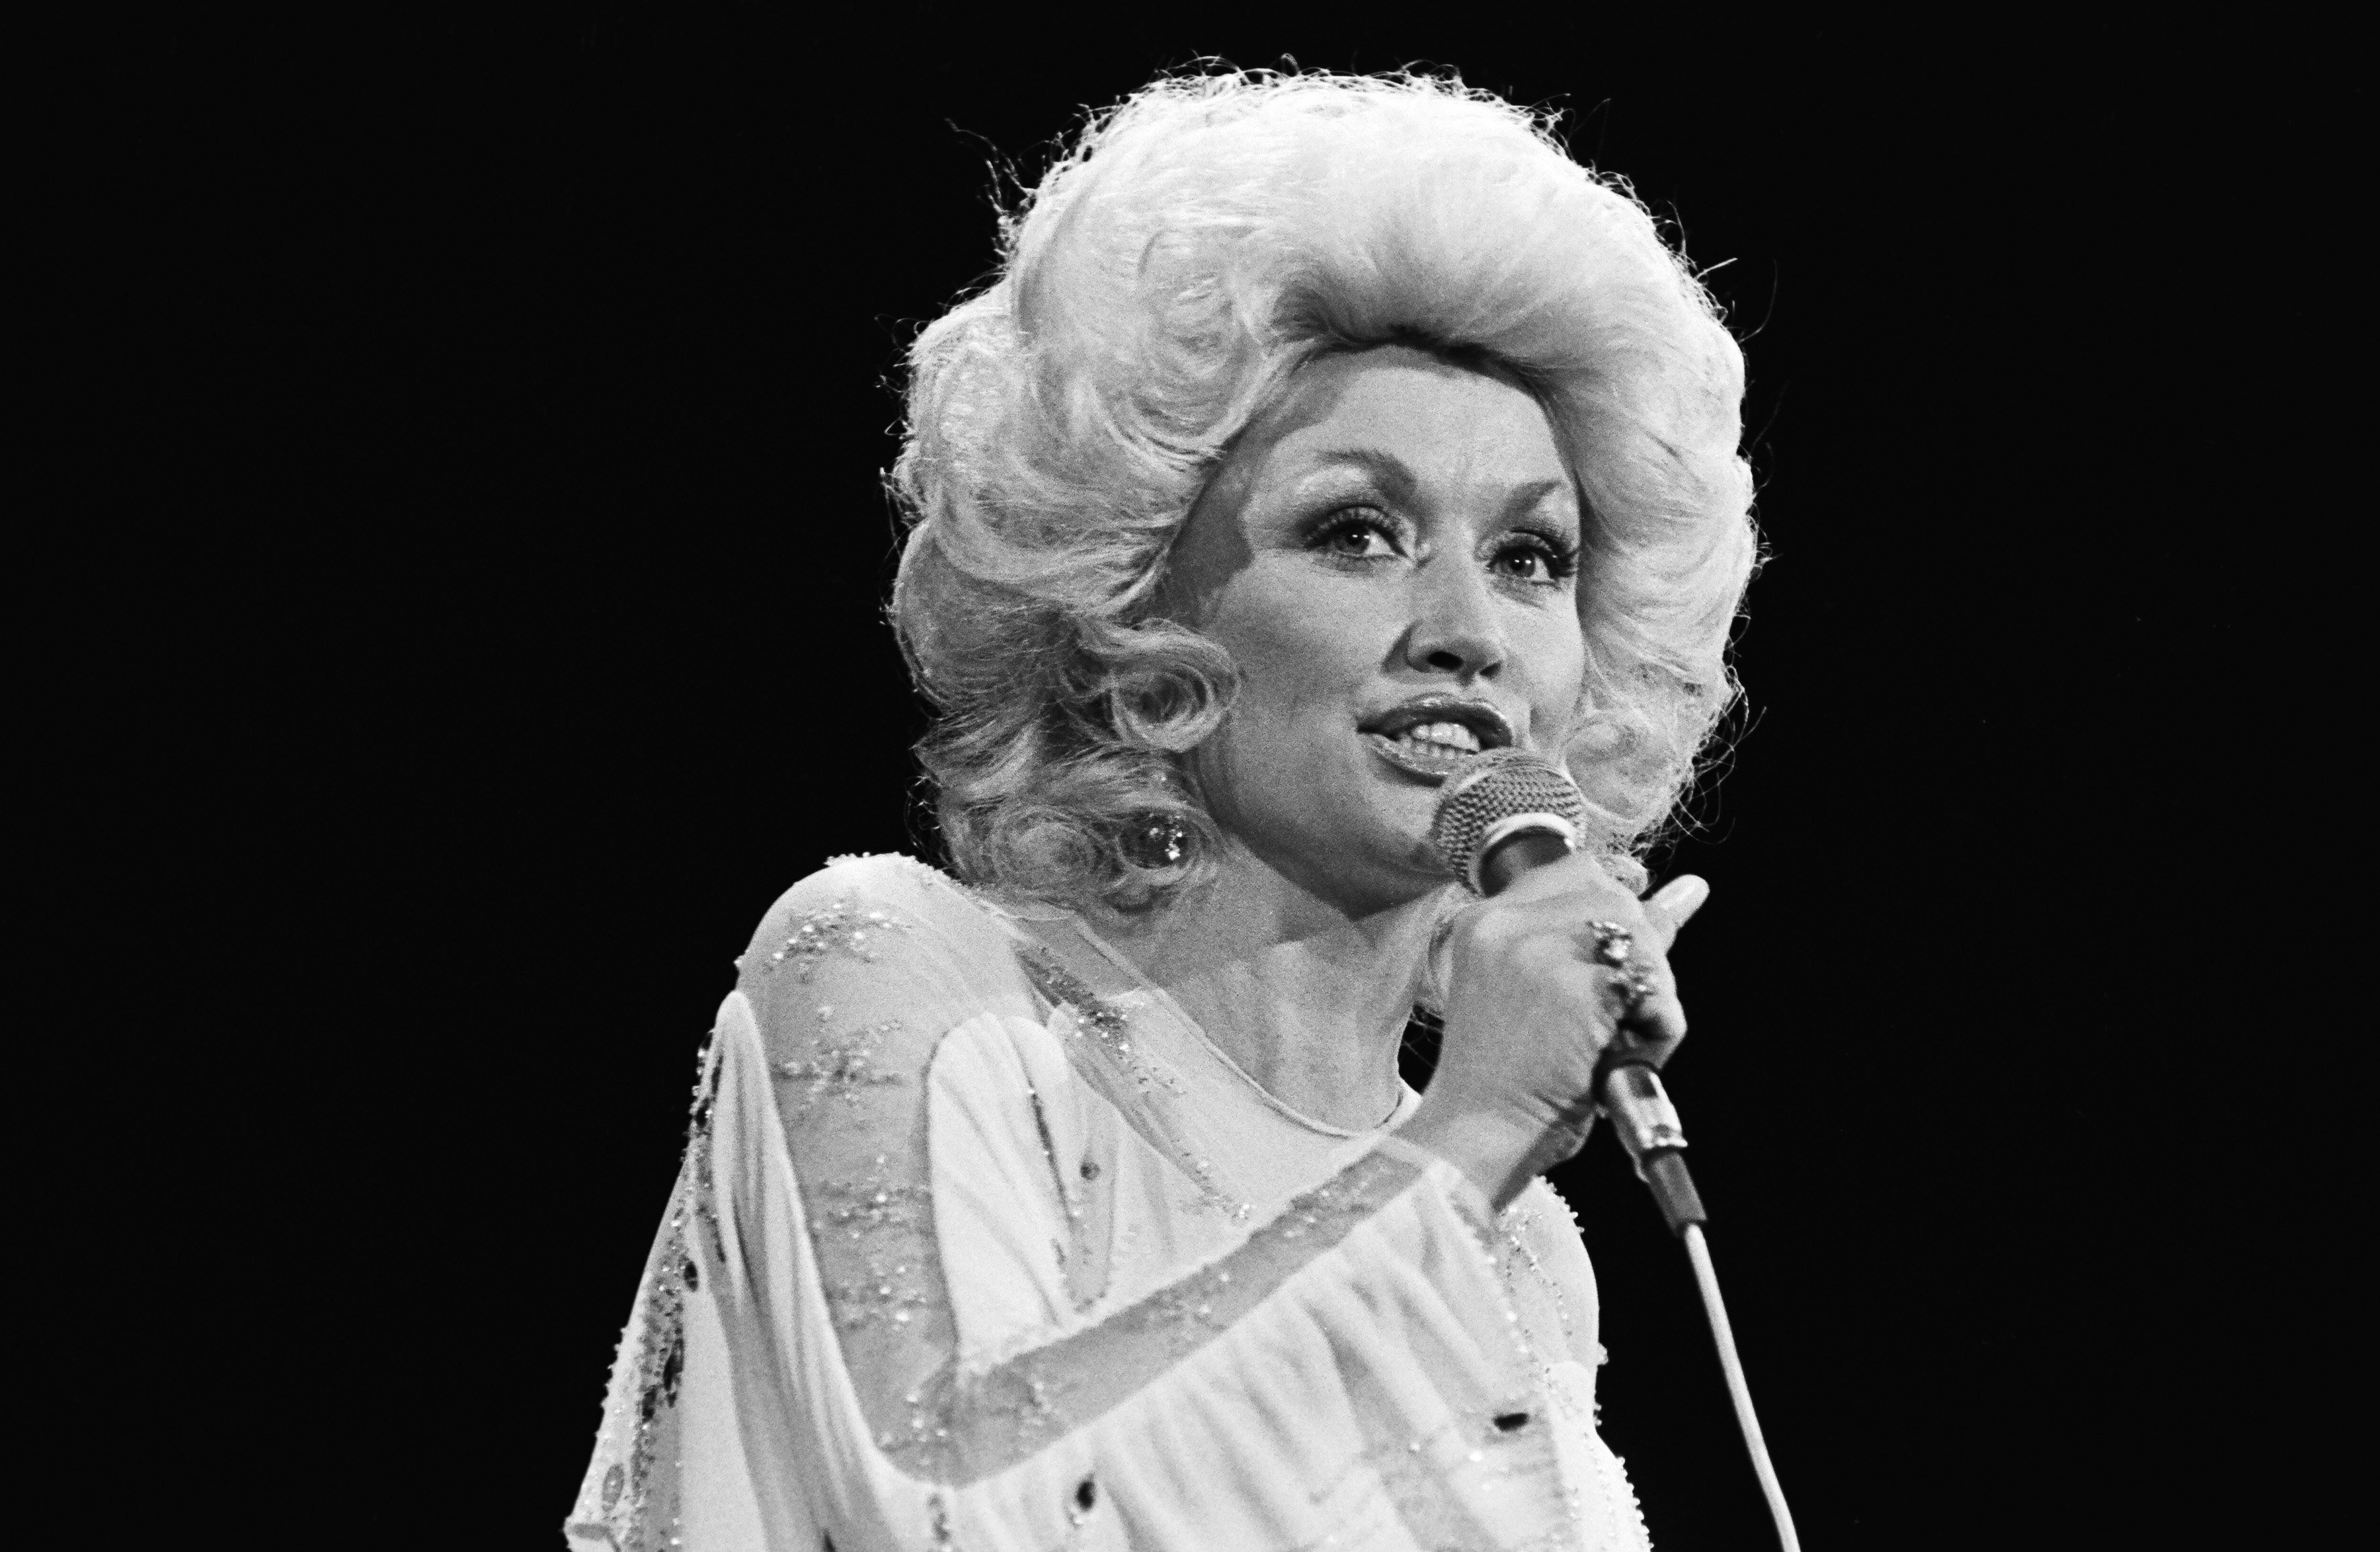 Country singer Dolly Parton performs one of her many hits in this 1981 Universal City, California, live concert photo.